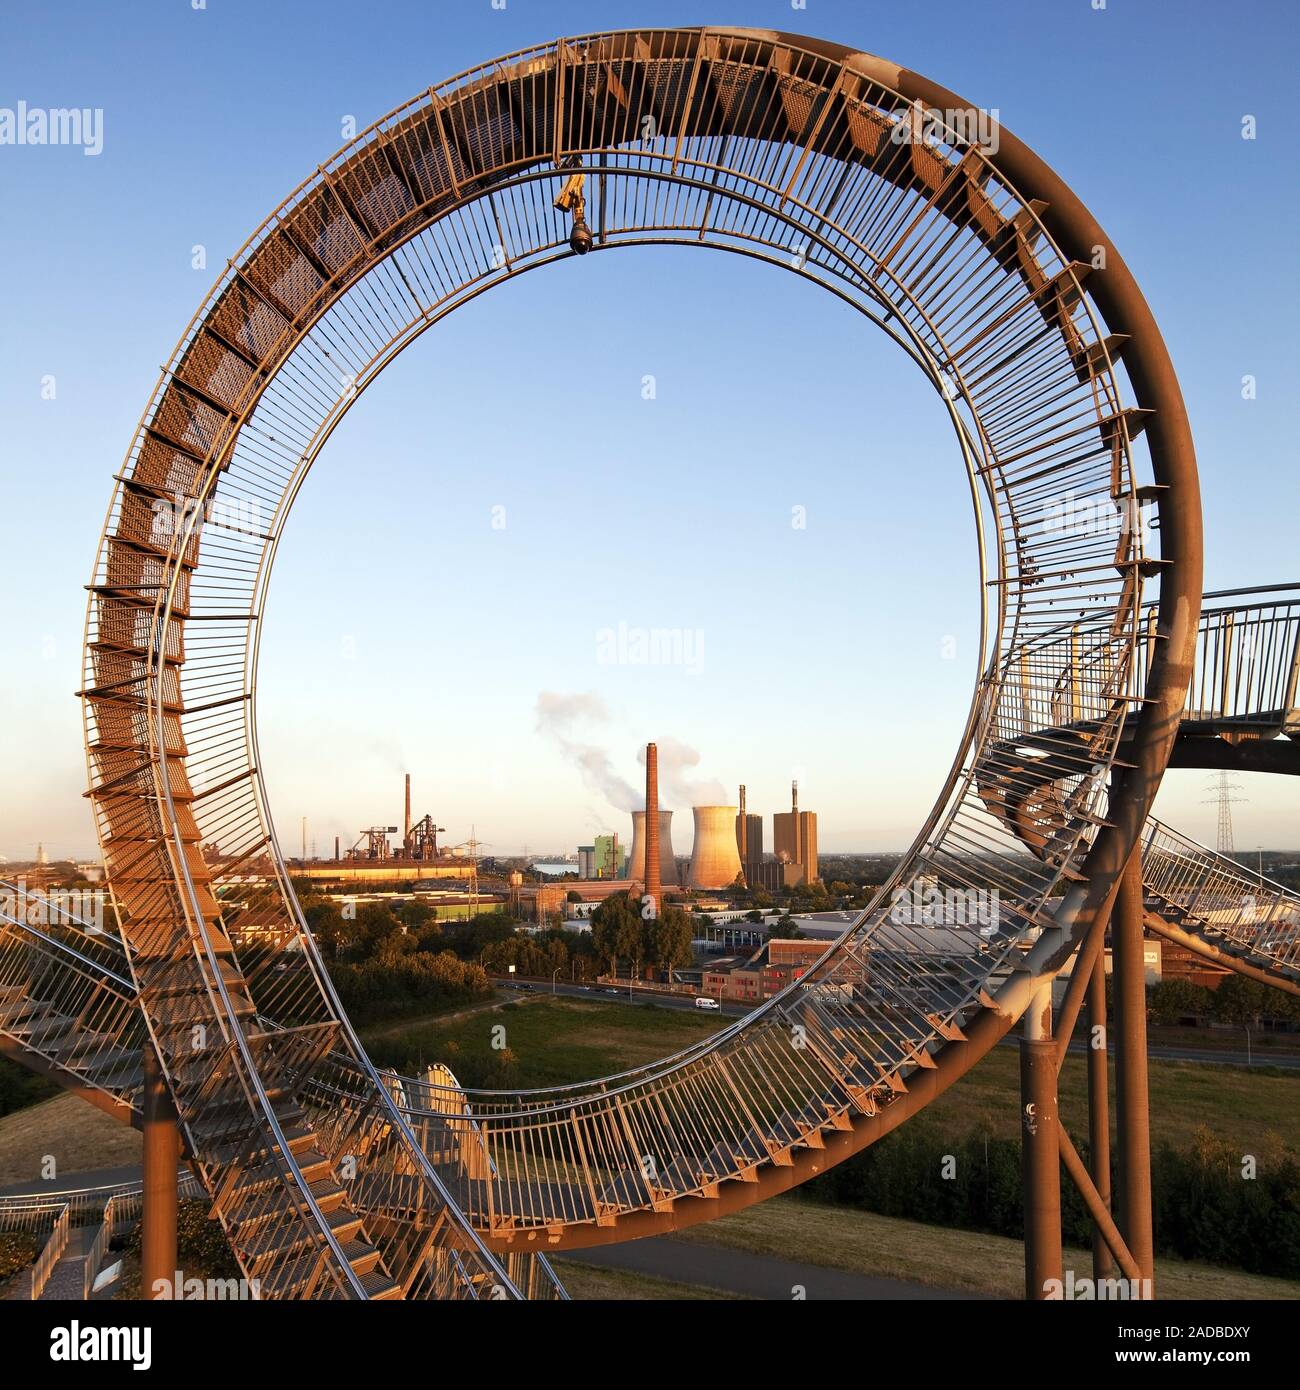 Tiger and Turtle - Magic Mountain, art sculpture and landmark, Angerpark, Duisburg, Germany, Europe Stock Photo